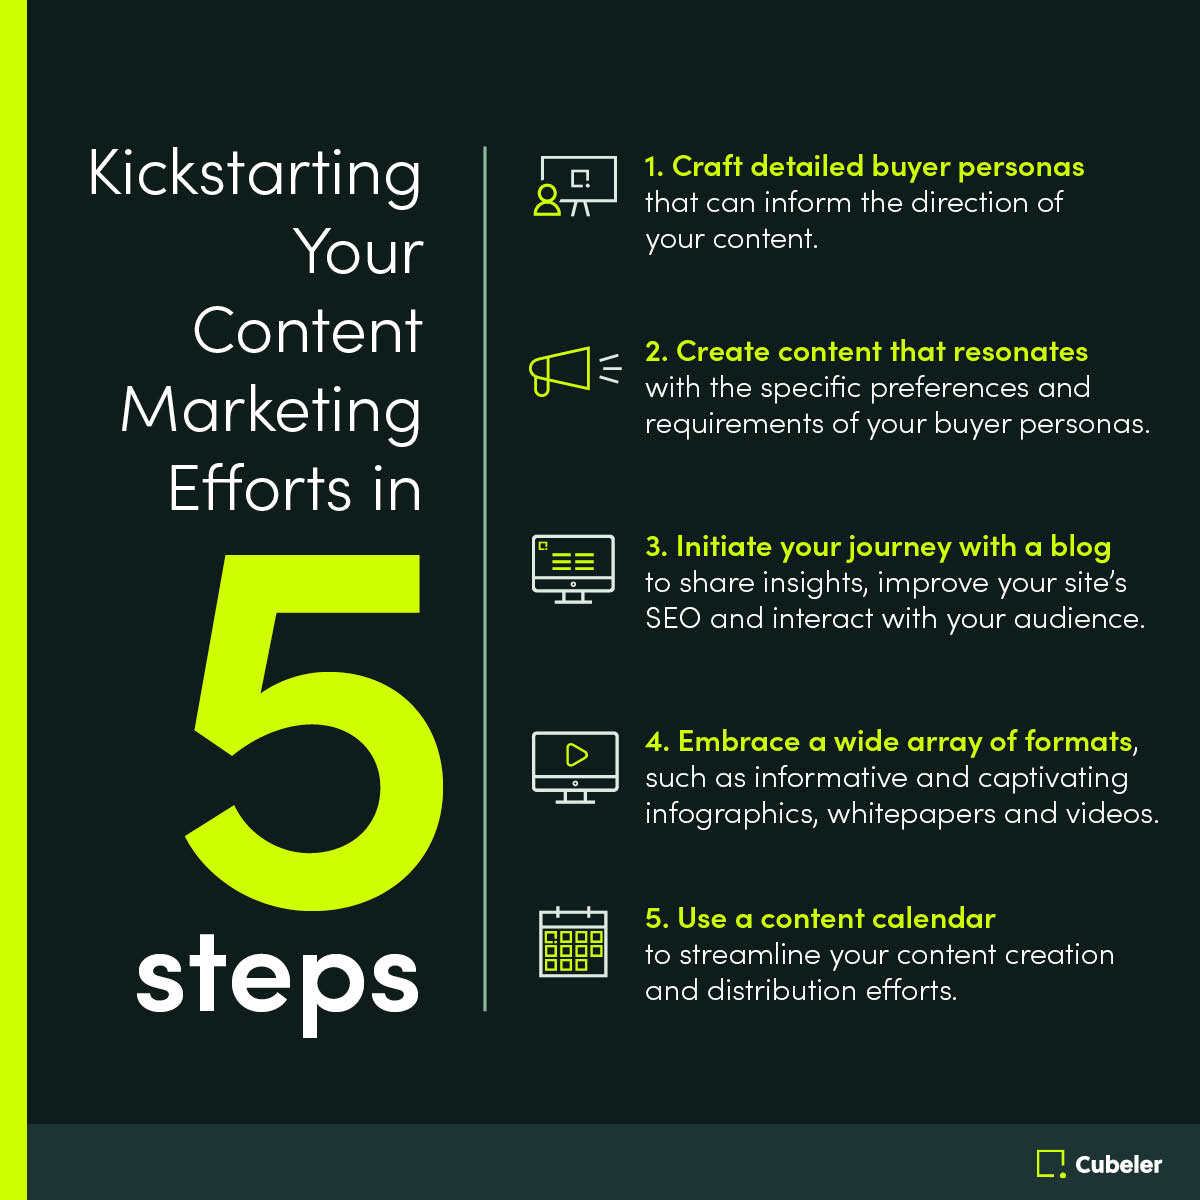 Kickstarting Your Content Marketing Efforts in 5 StepsKickstarting Your Content Marketing Efforts in 5 Steps